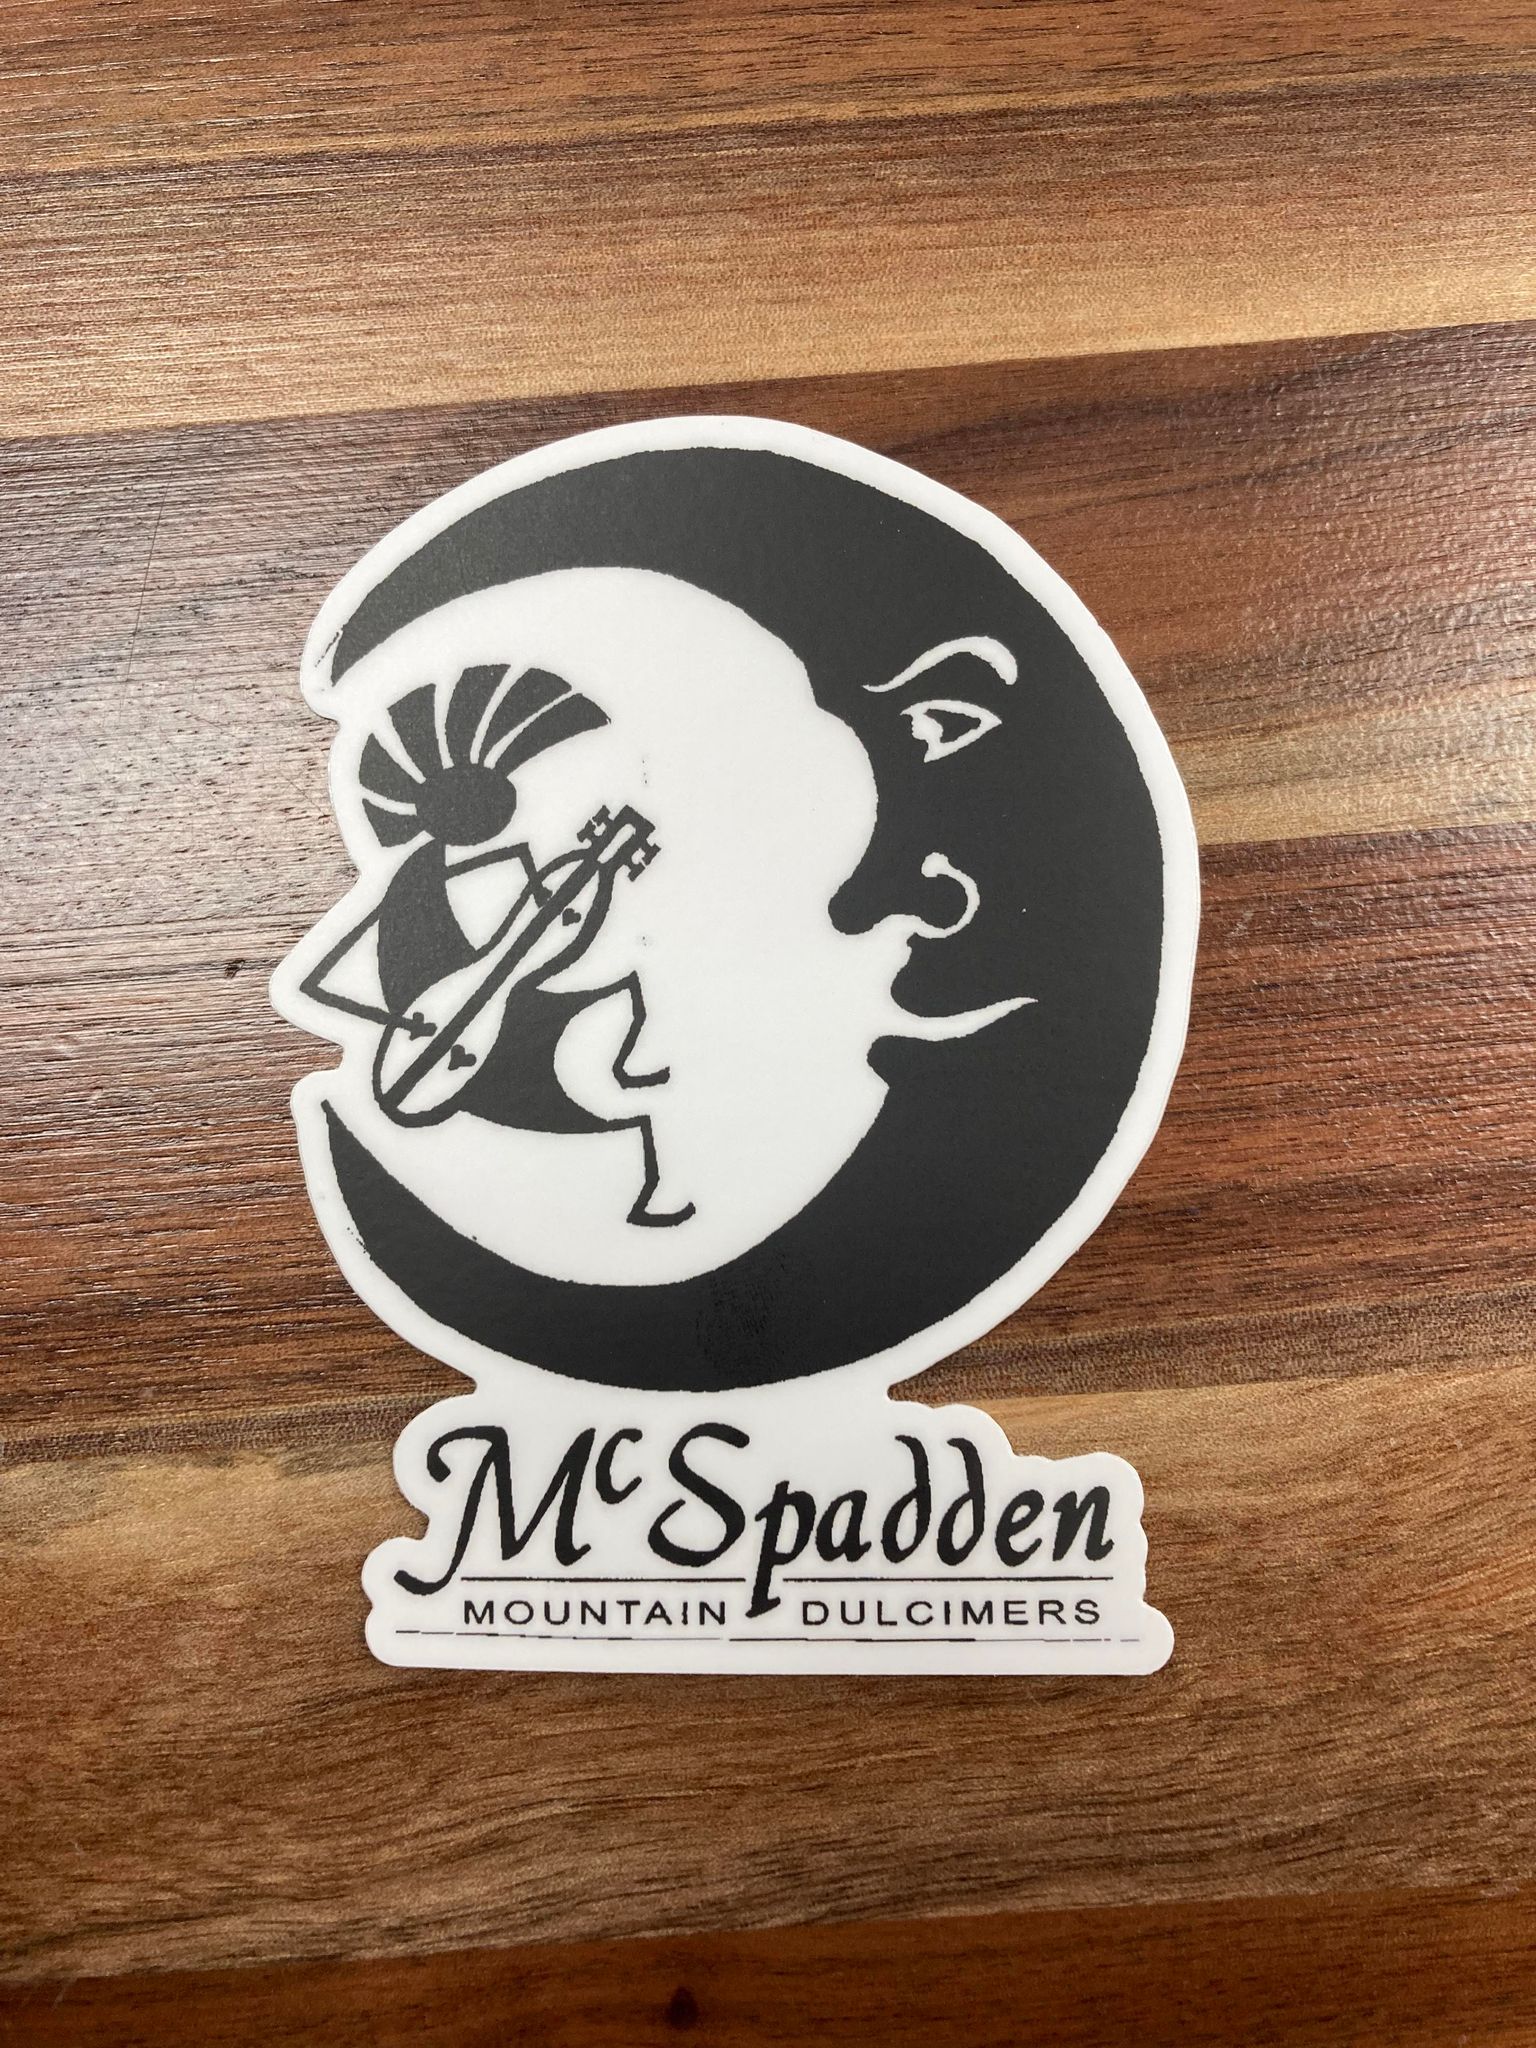 McSpadden Stickers for decorating laptops, featuring a logo with stylized imagery of a moon and a person playing a stringed instrument, with the text "mcspadden mountain dulcimers" displayed below.